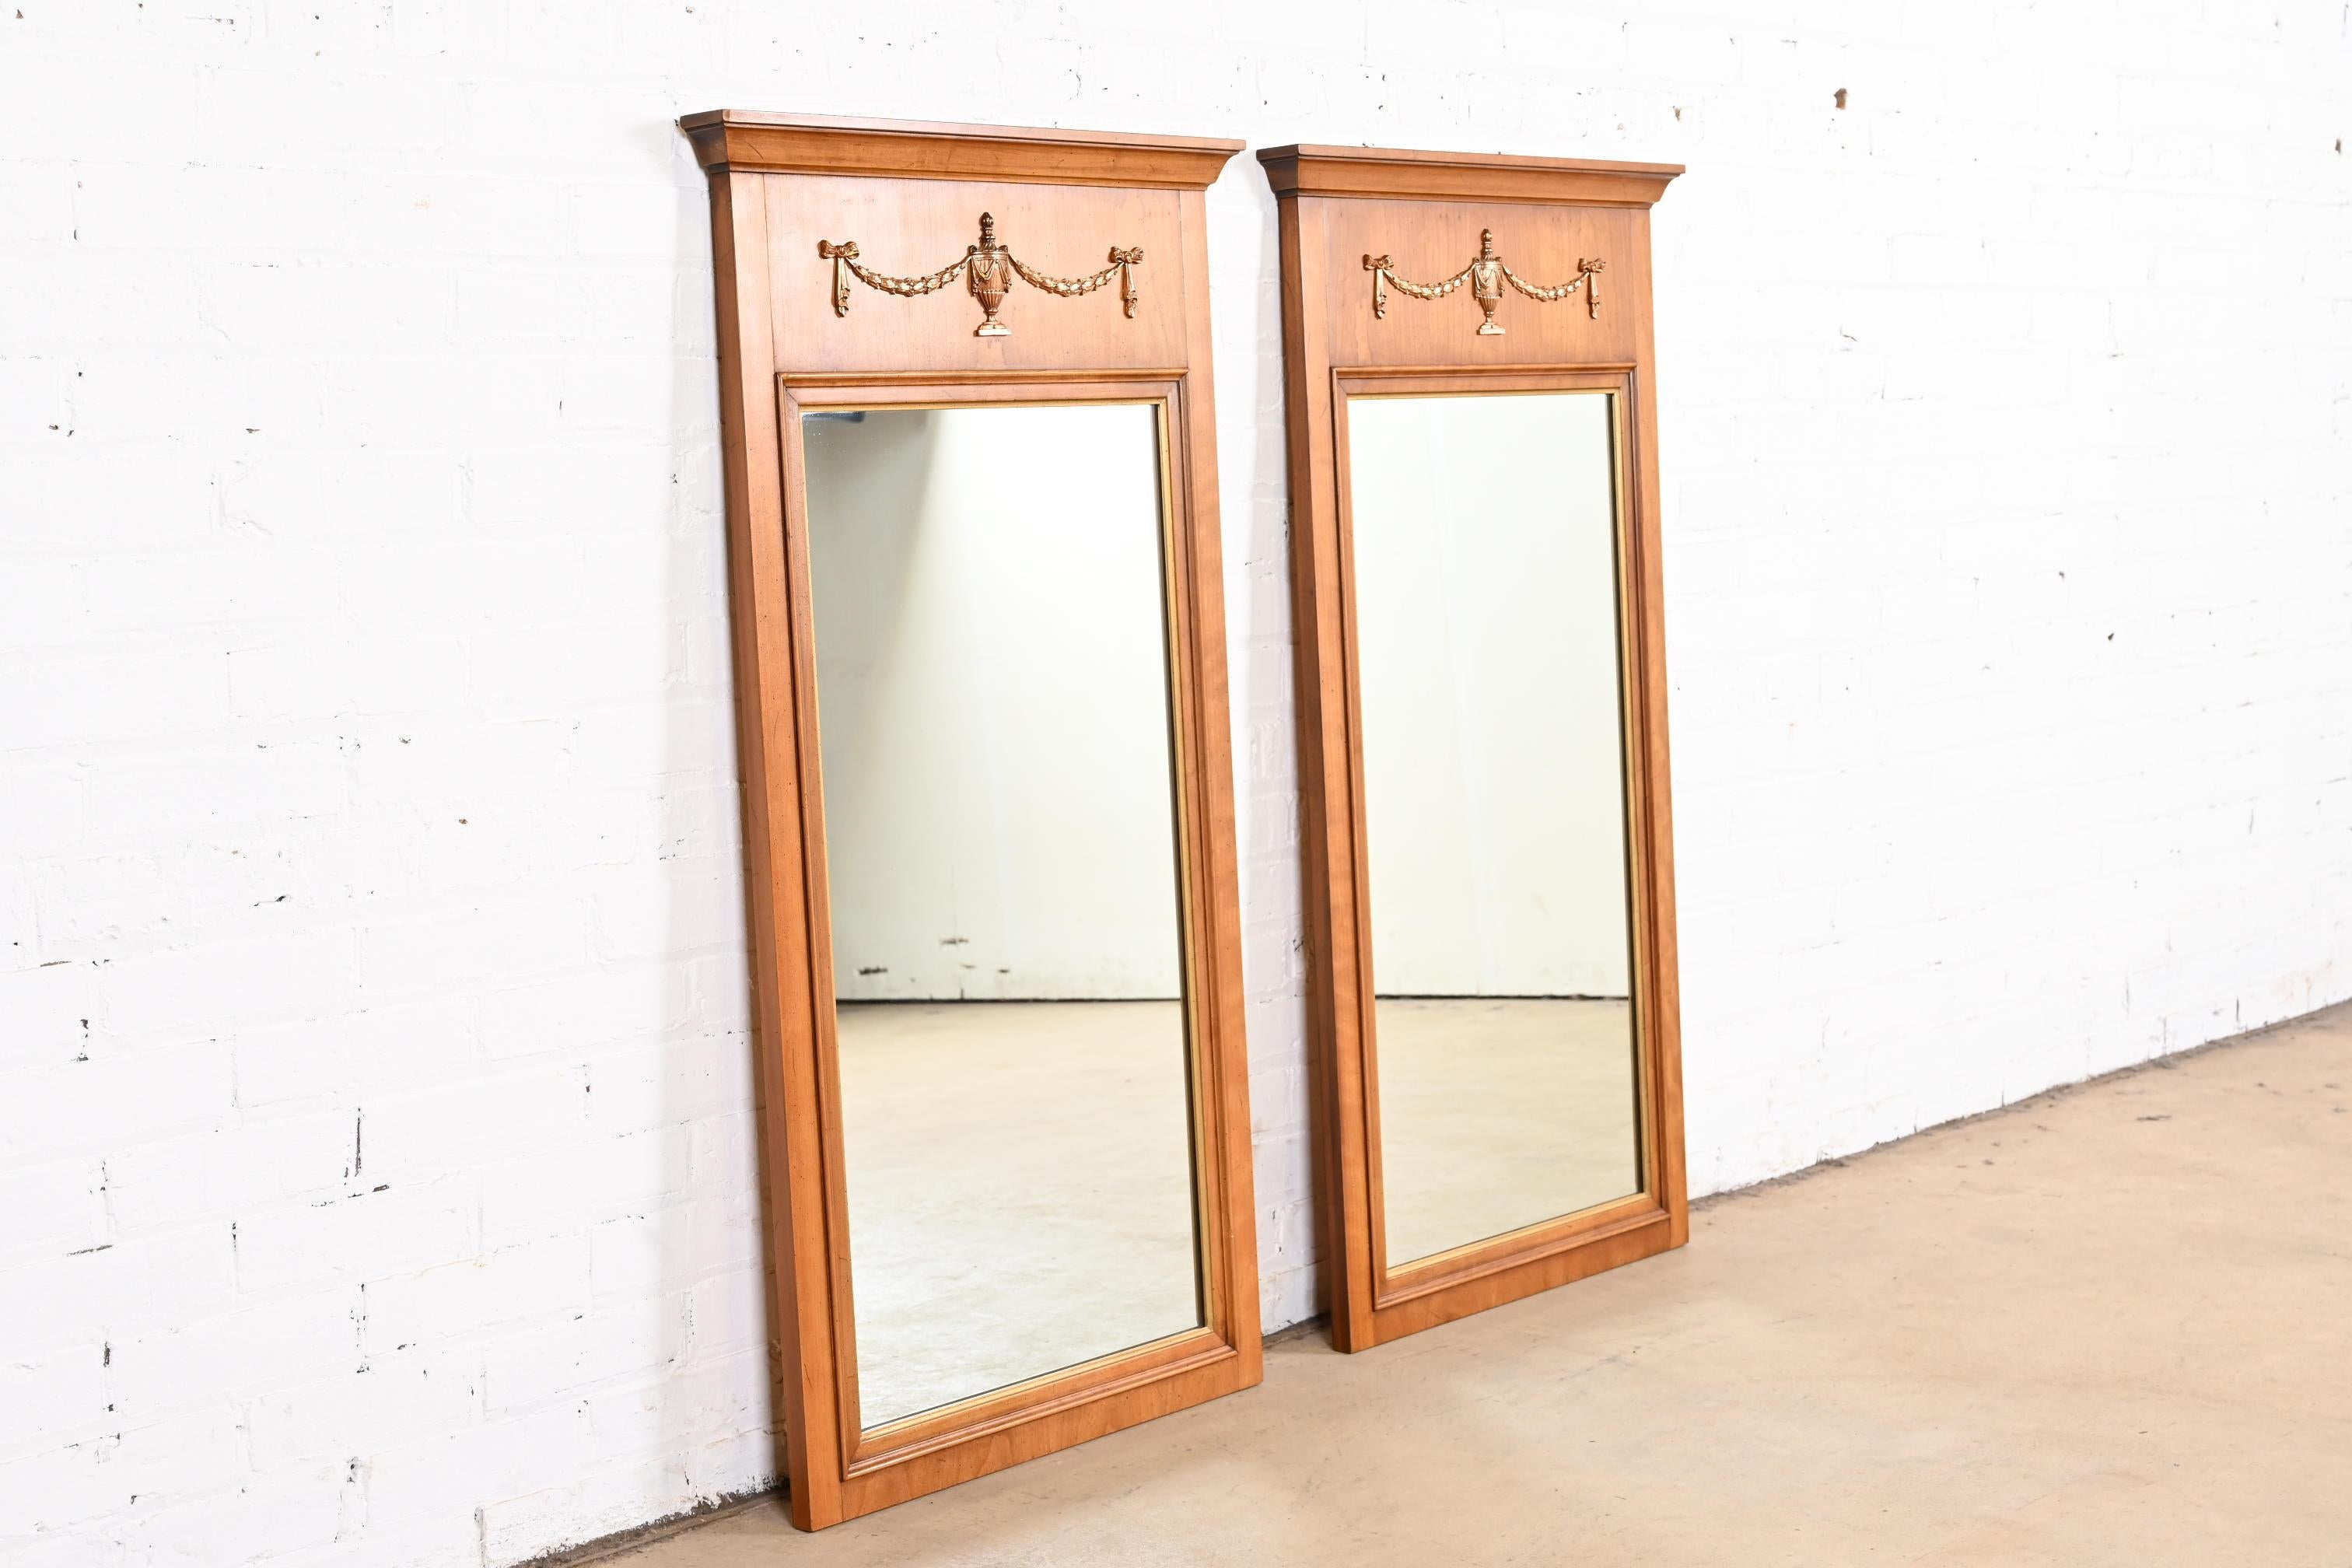 A gorgeous pair of French Regency Louis XVI or Neoclassical style framed wall mirrors

By Henredon

USA, Circa 1960s

Carved cherry wood frames, with gold gilt trim and mounted brass ormolu.

Measures: 24.25